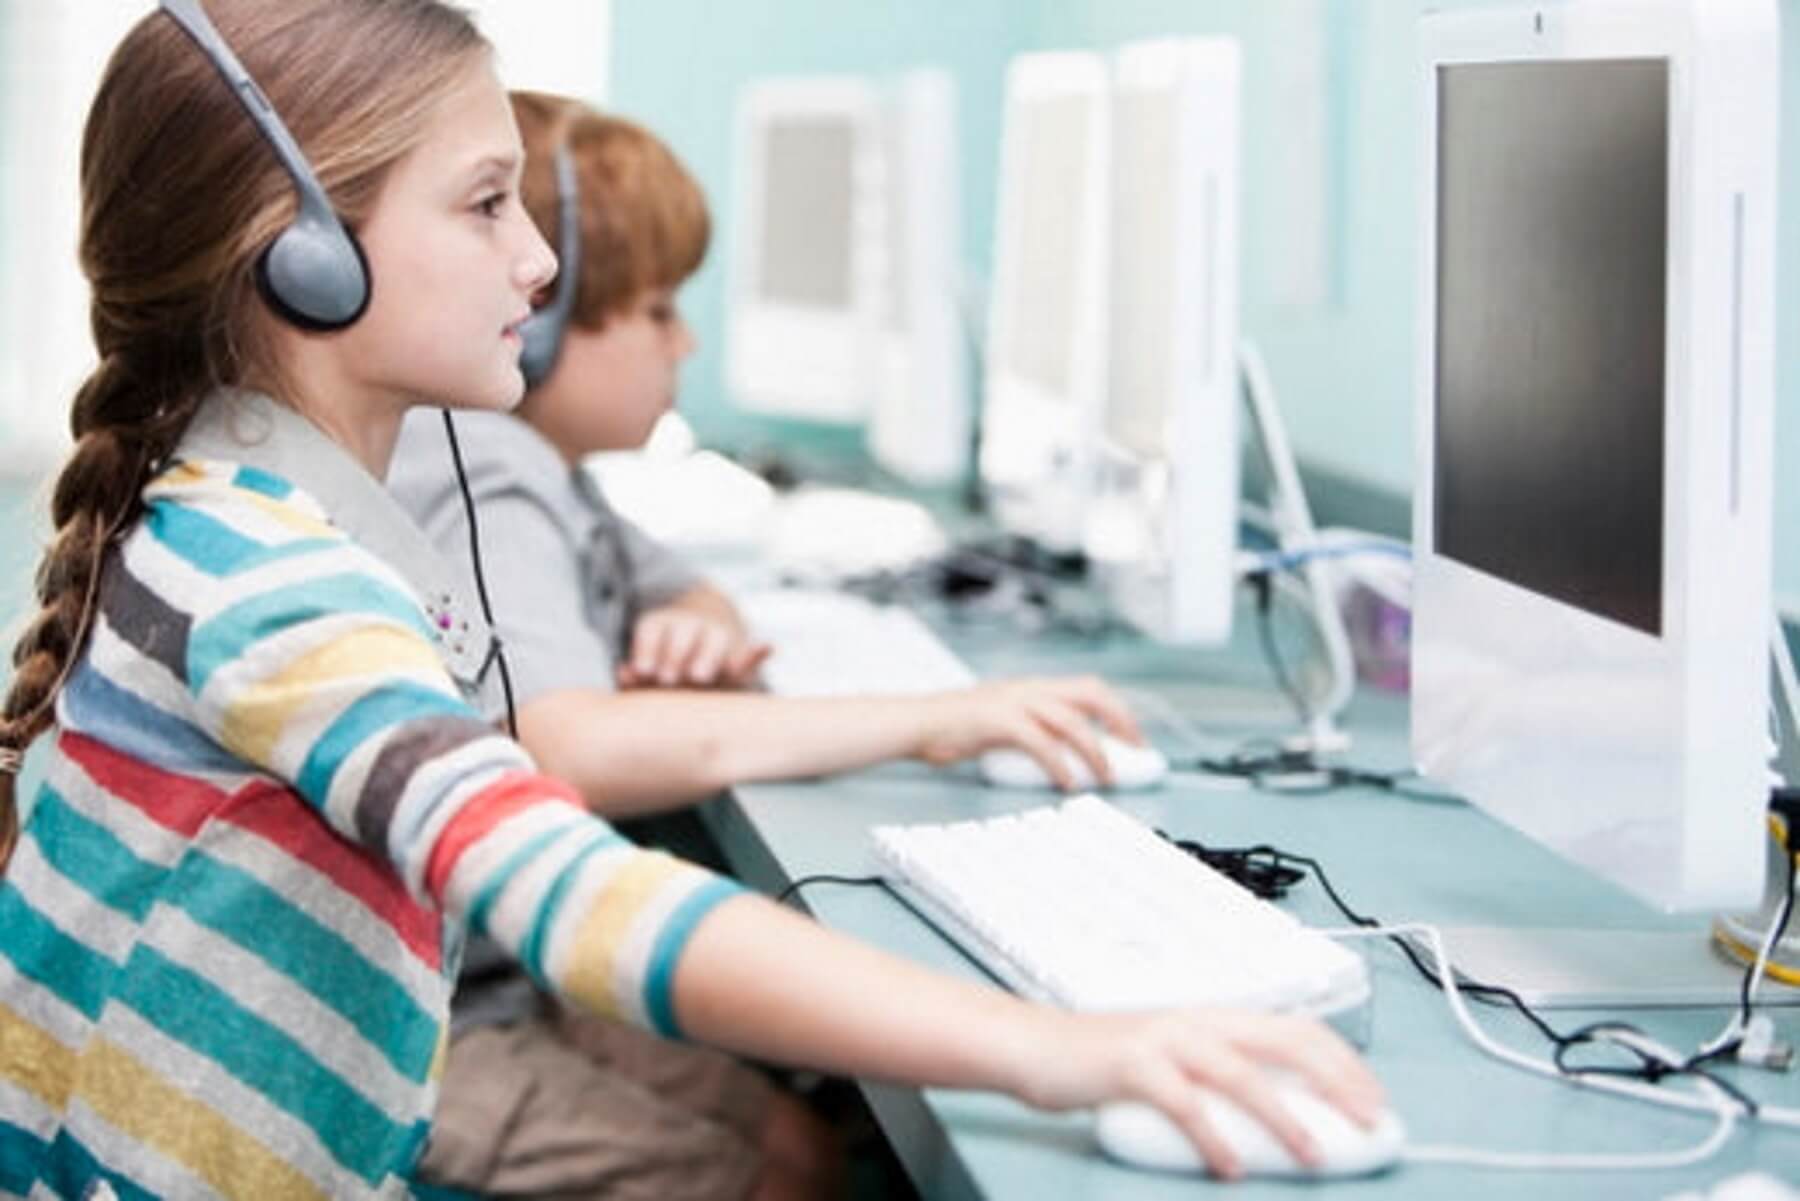 School headphones are vital for today's students. We outline the best practices for caring, cleaning and handling your child's school headphones to ensure they last long.